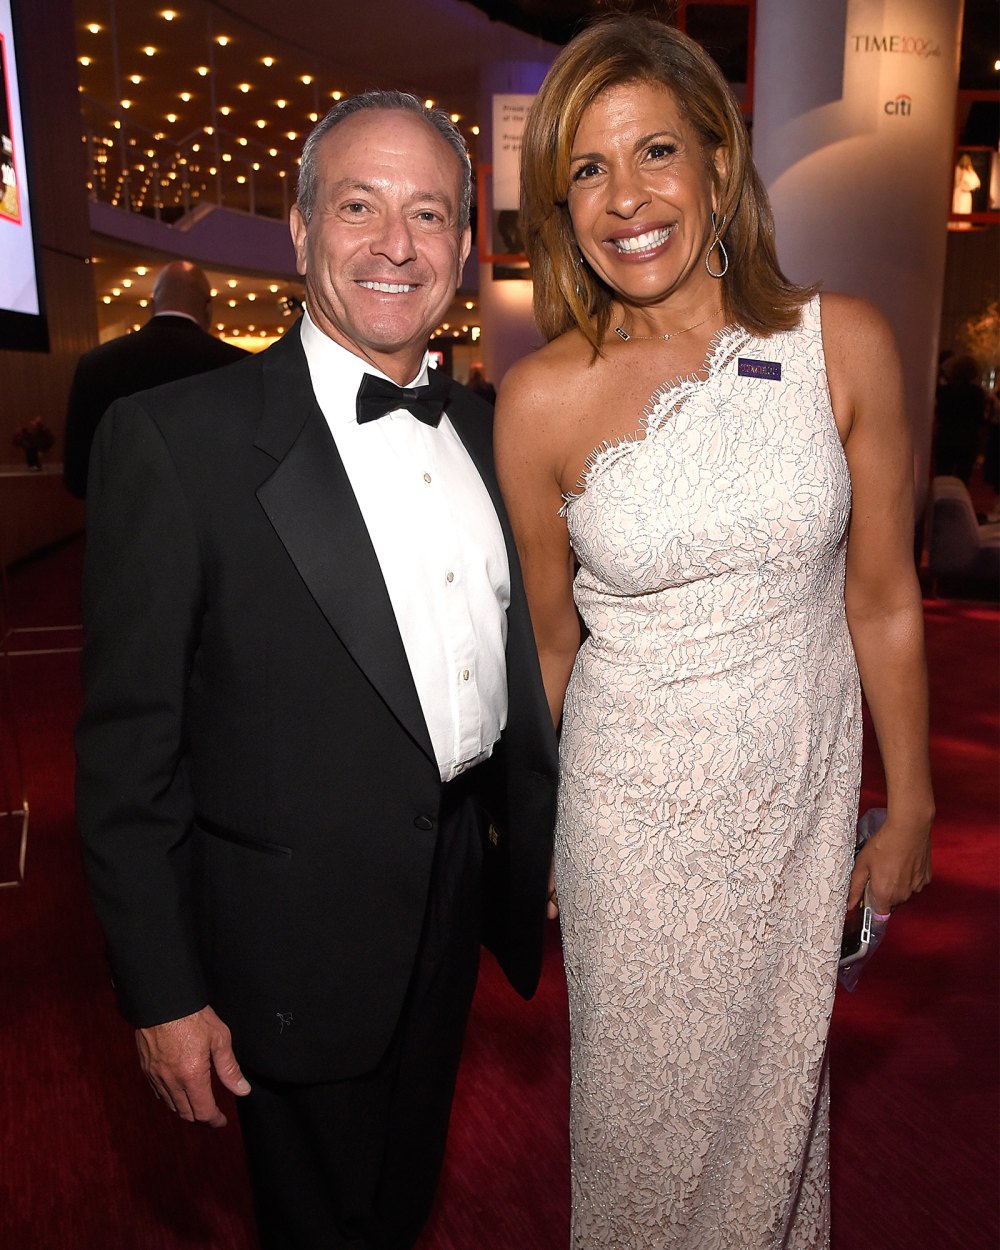 Hoda Kotb Makes Rare Comment About Ex Joel Schiffman on ‘Today’ 2 Years After Split